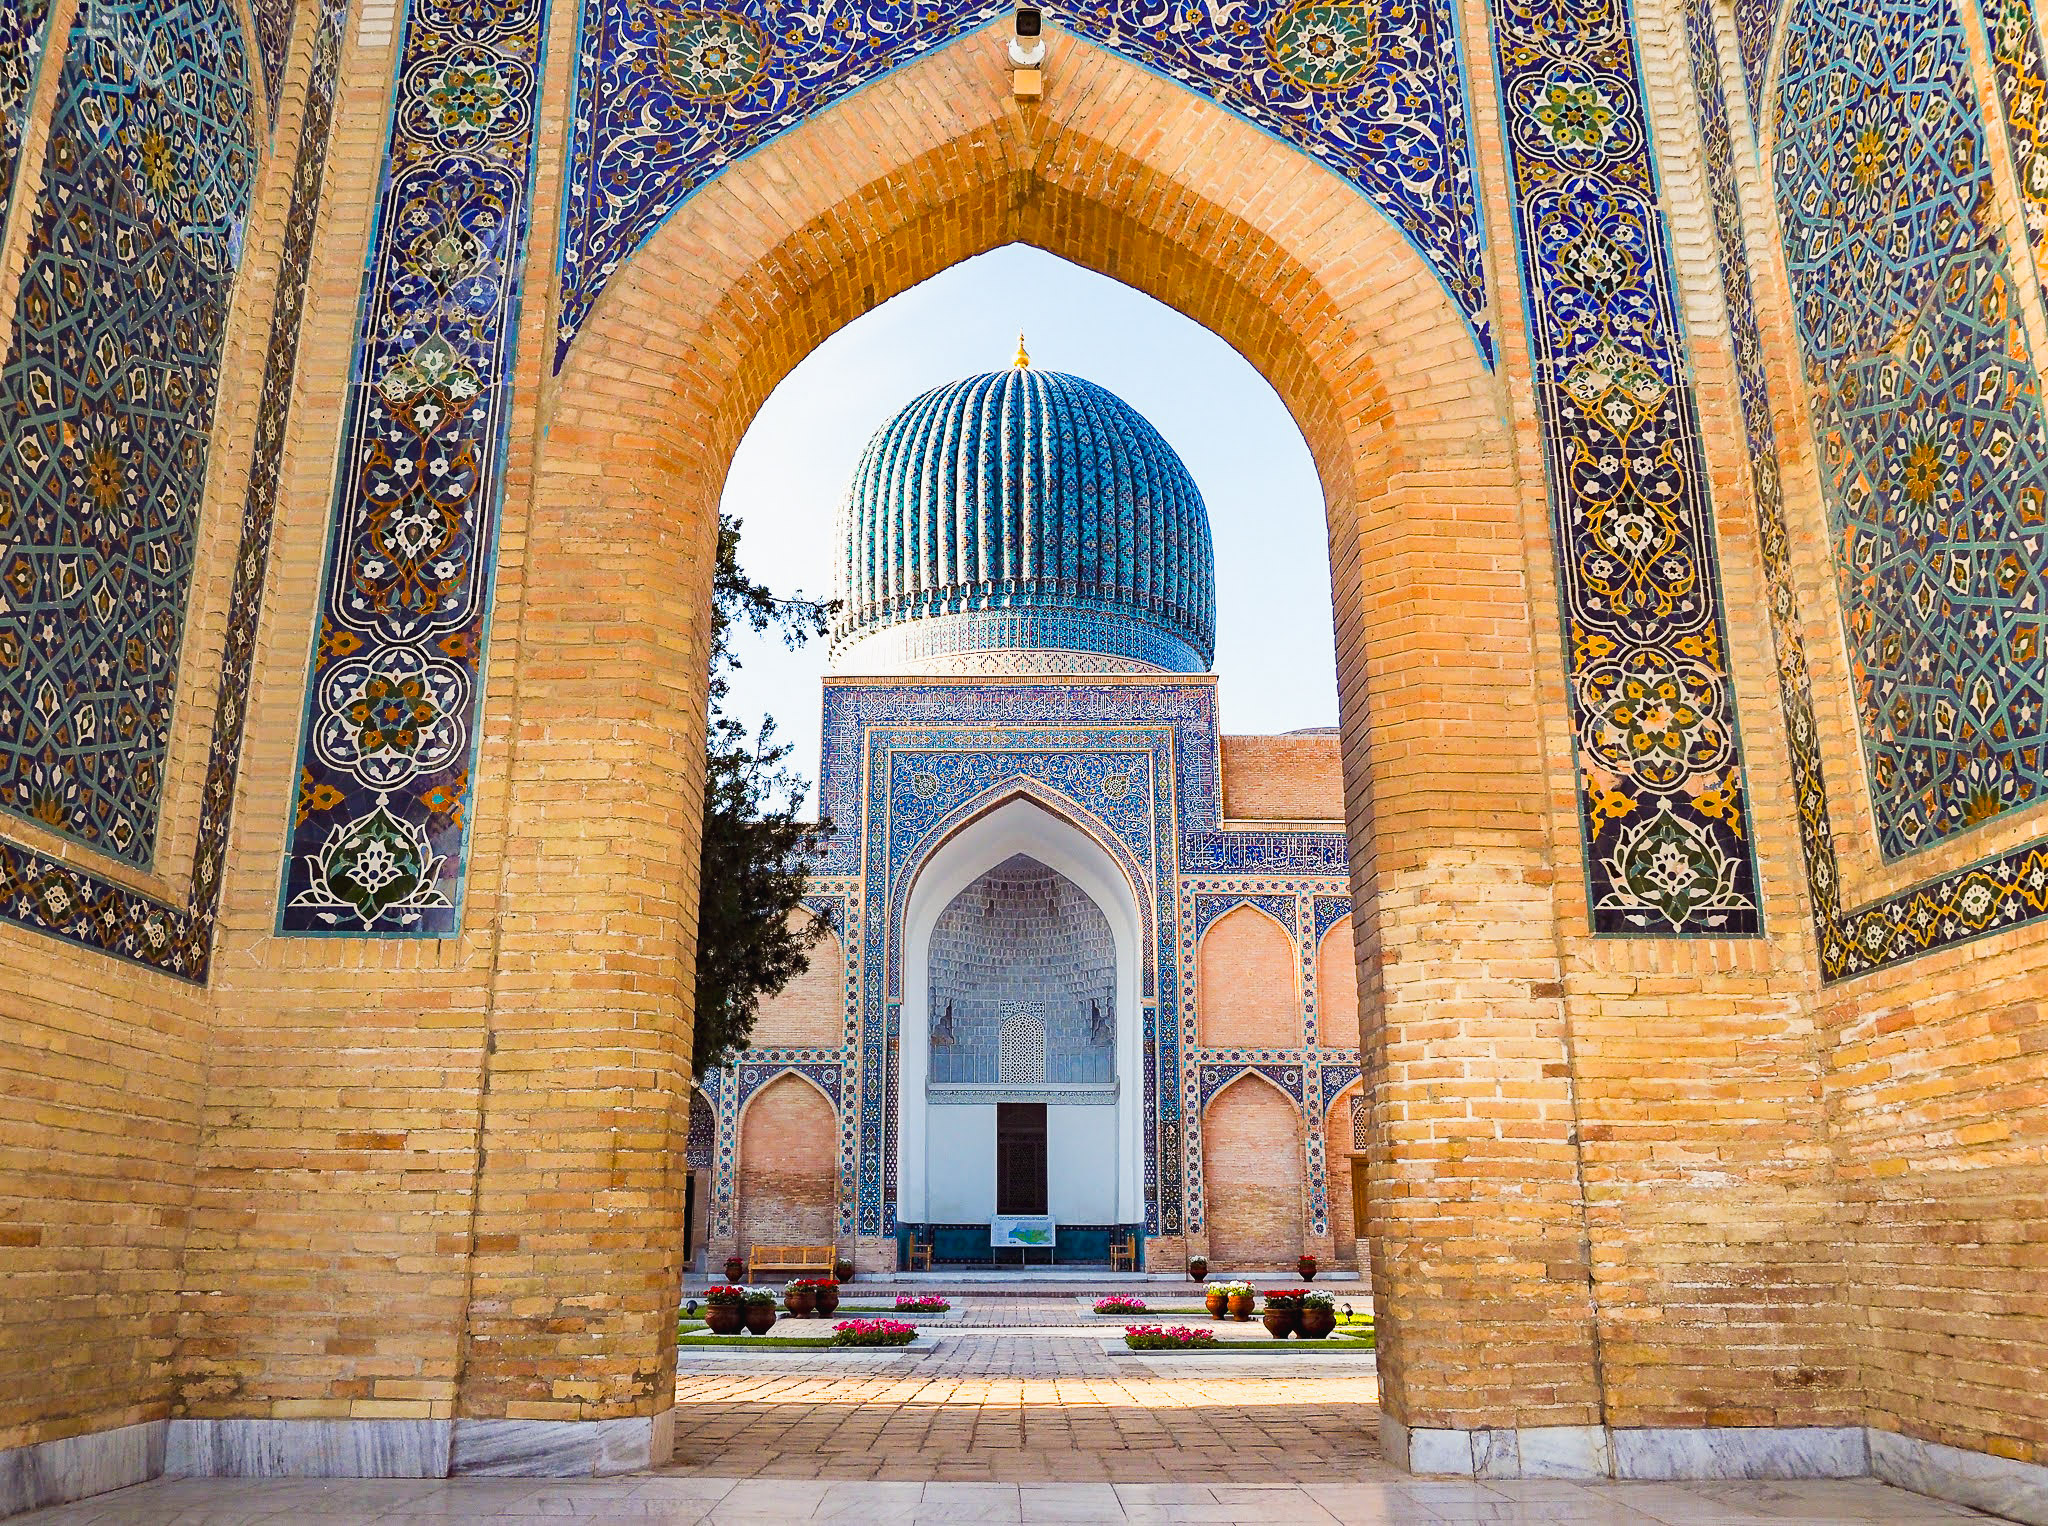 A blue domed mausoleum framed by a brick archway and intricate, geometrical design.